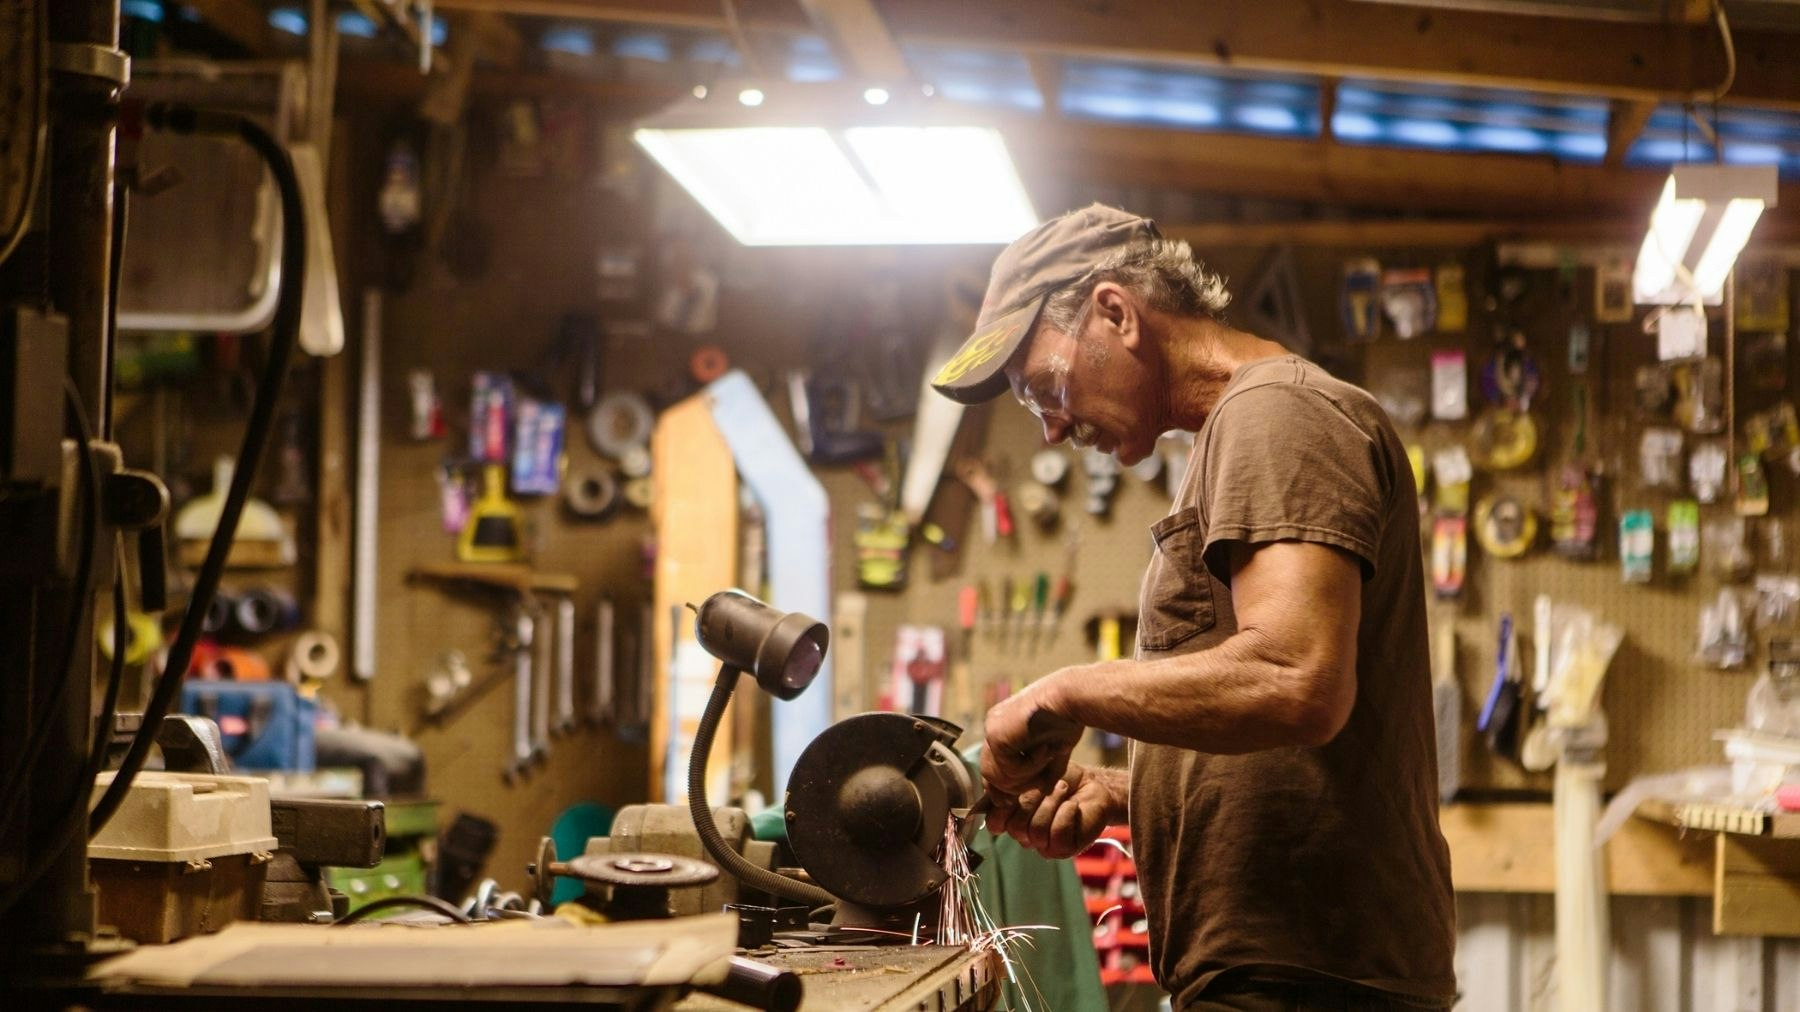 How to Choose the Best Lighting for Your Garage Workshop - The